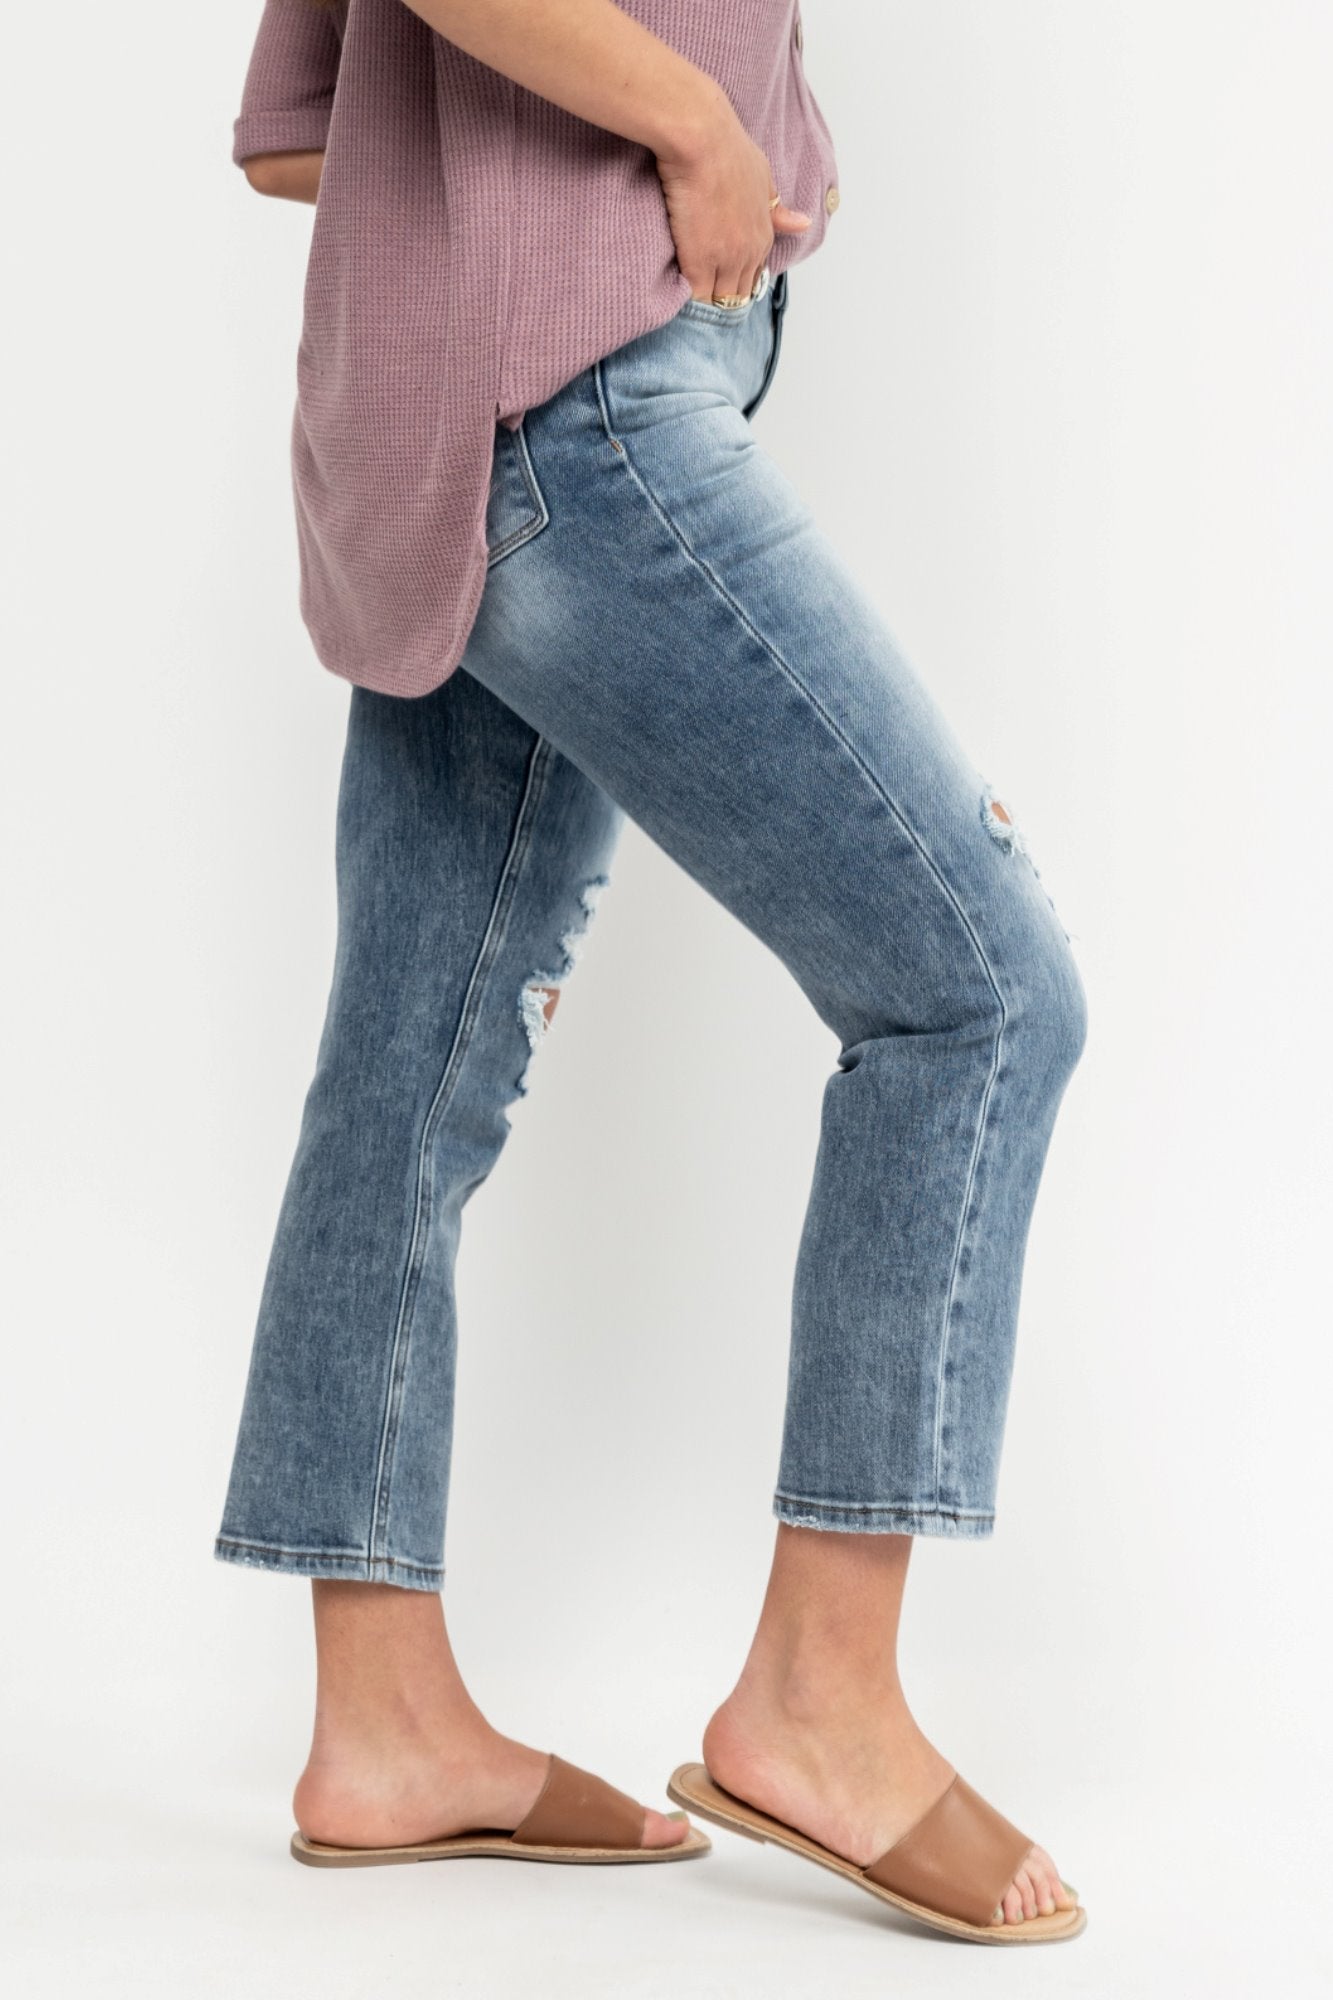 Emmie Jeans Holley Girl 